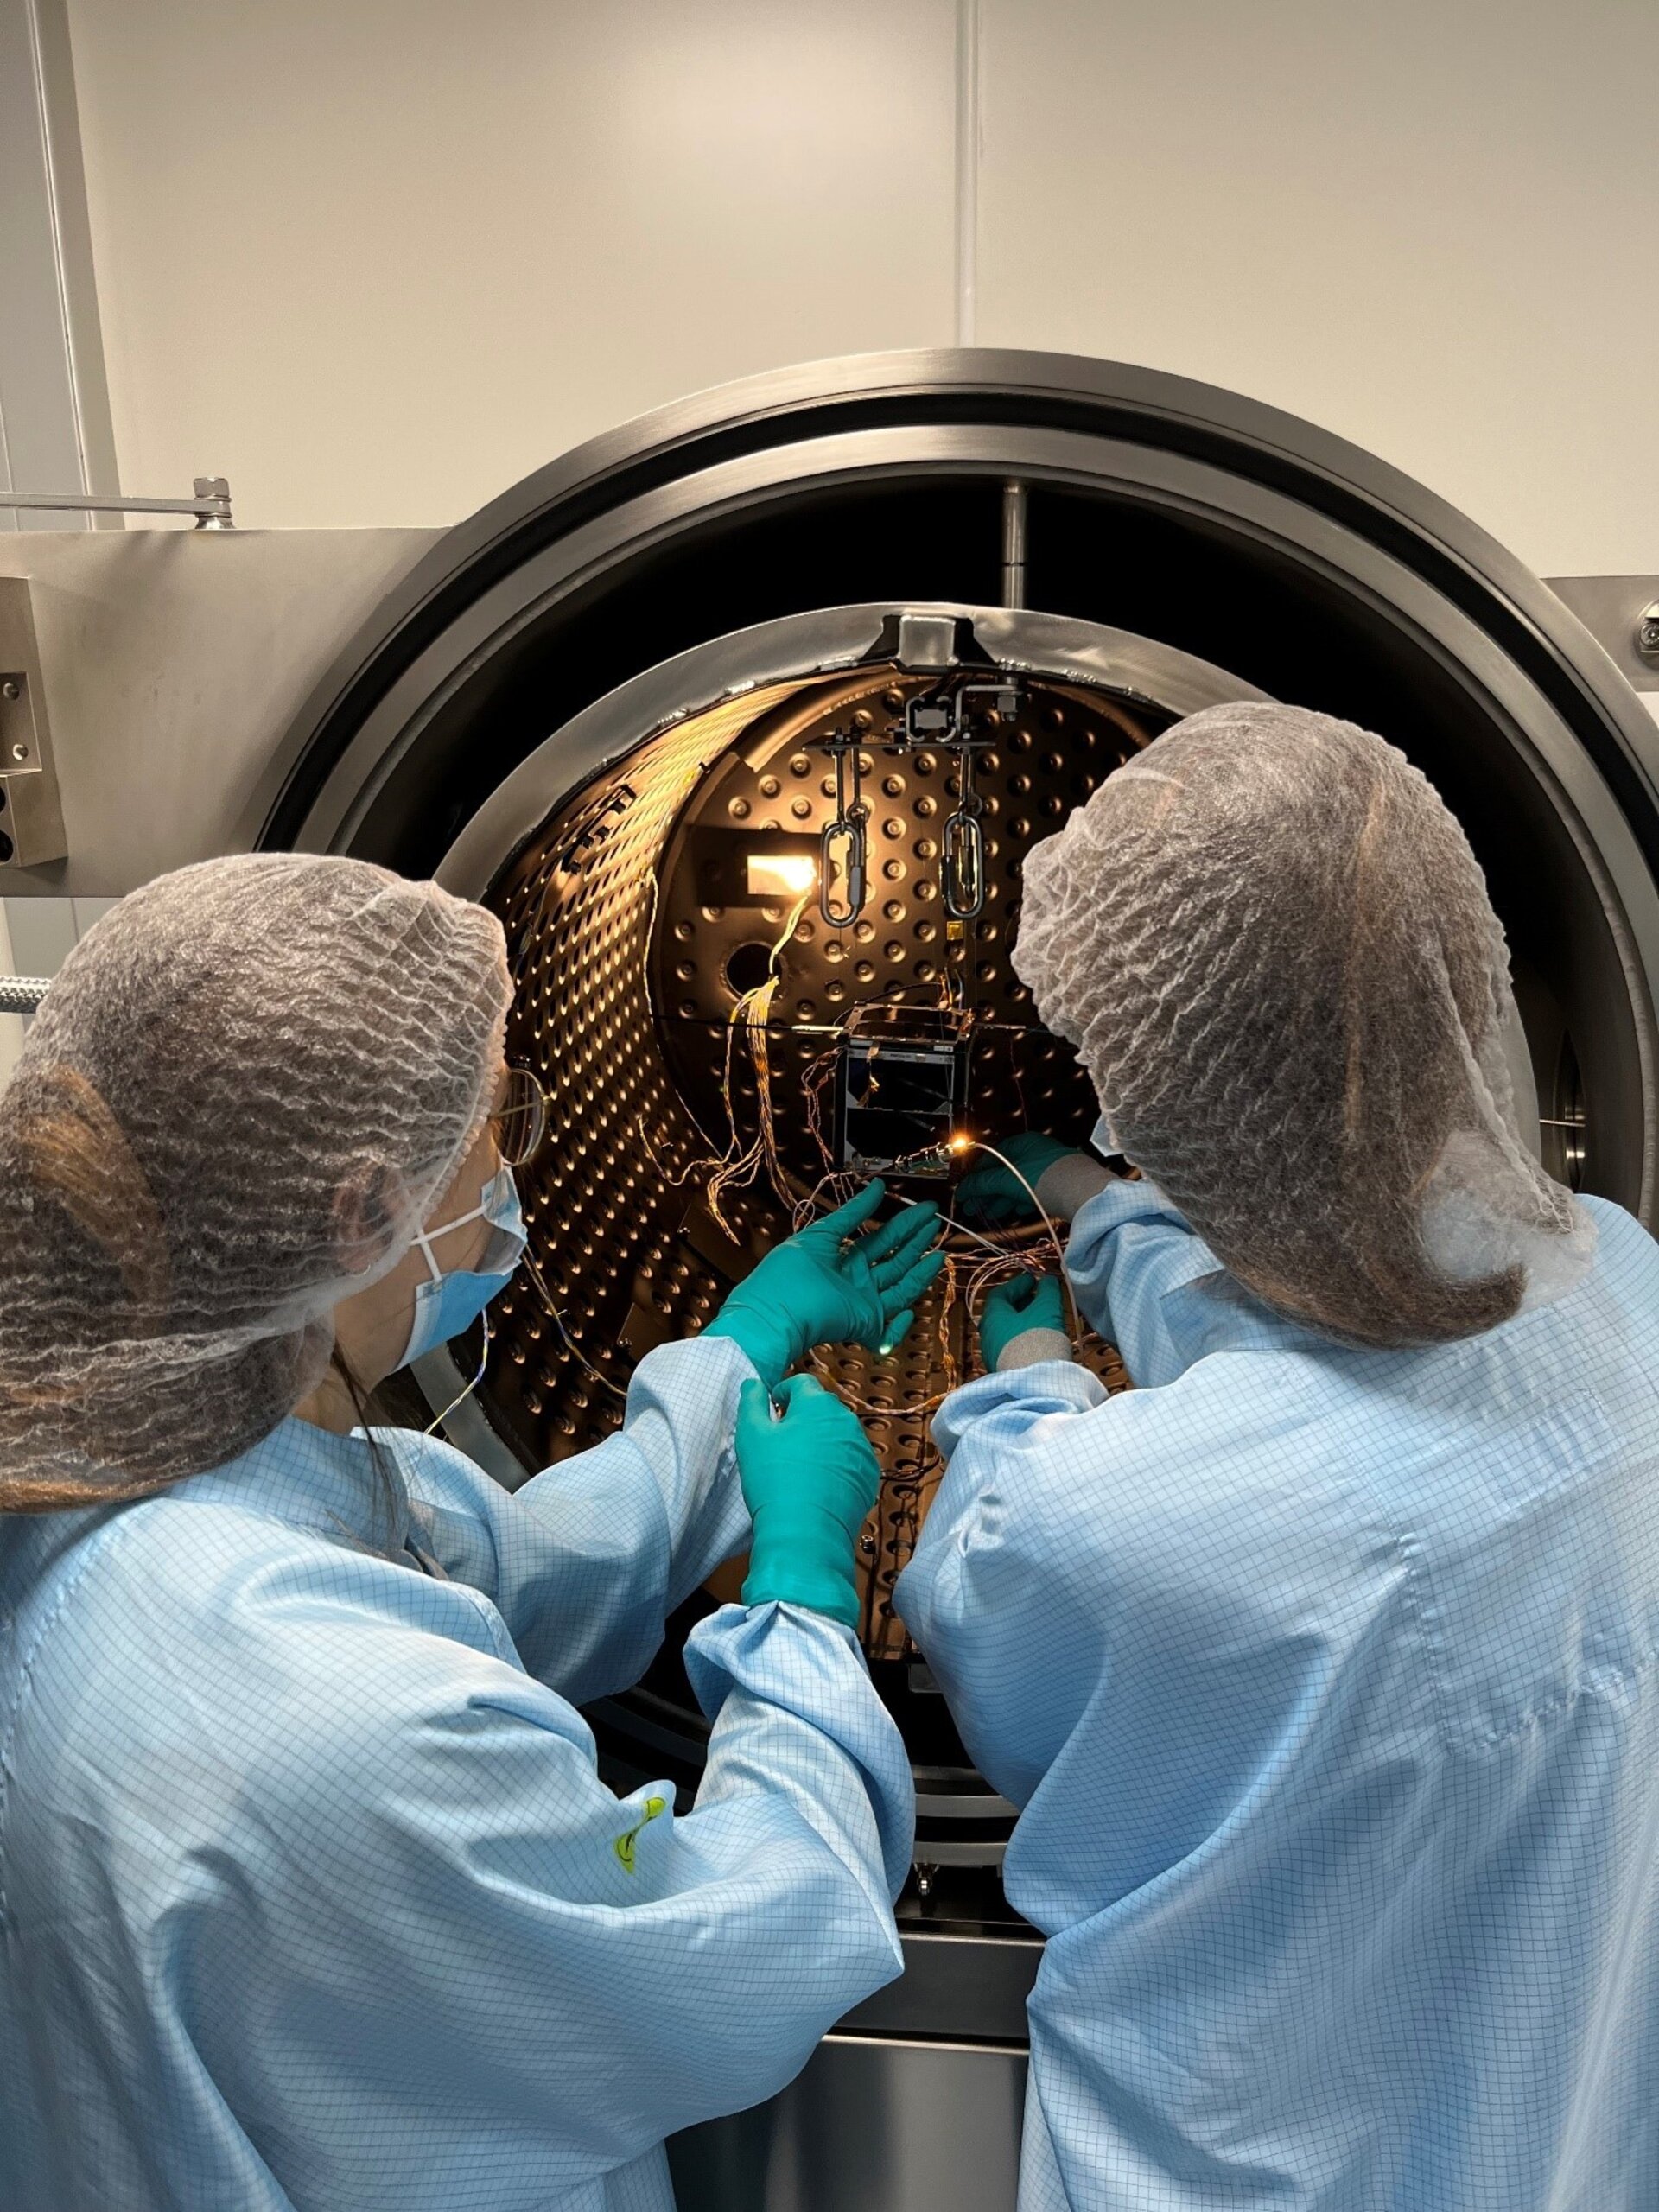 Students inspecting ISTSat-1 in thermal vacuum chamber